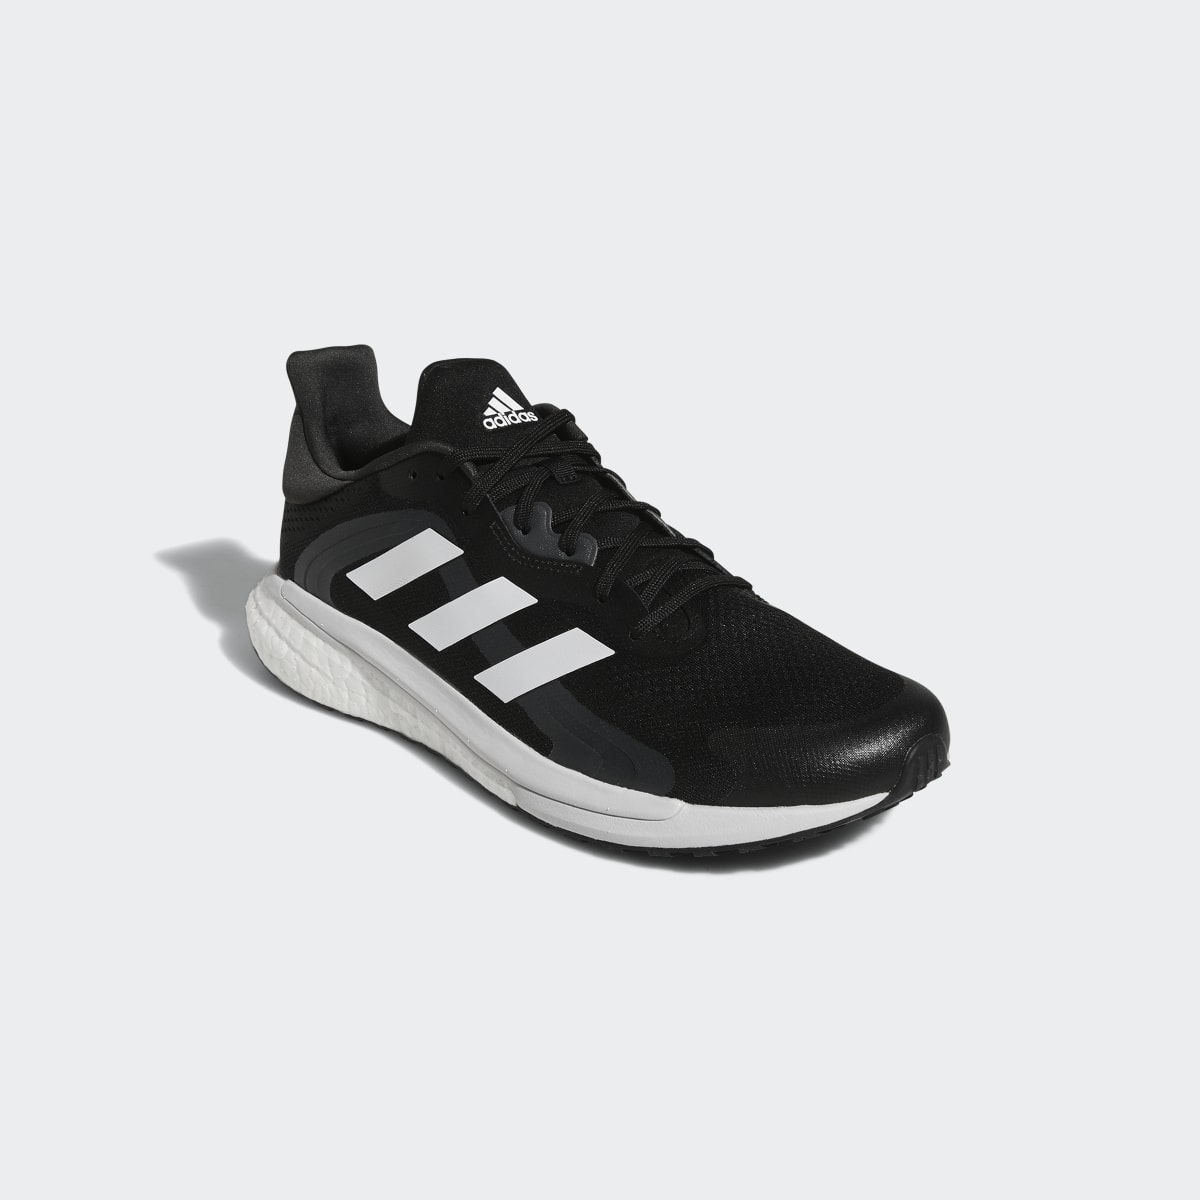 Adidas Chaussure SolarGlide 4 ST. 13